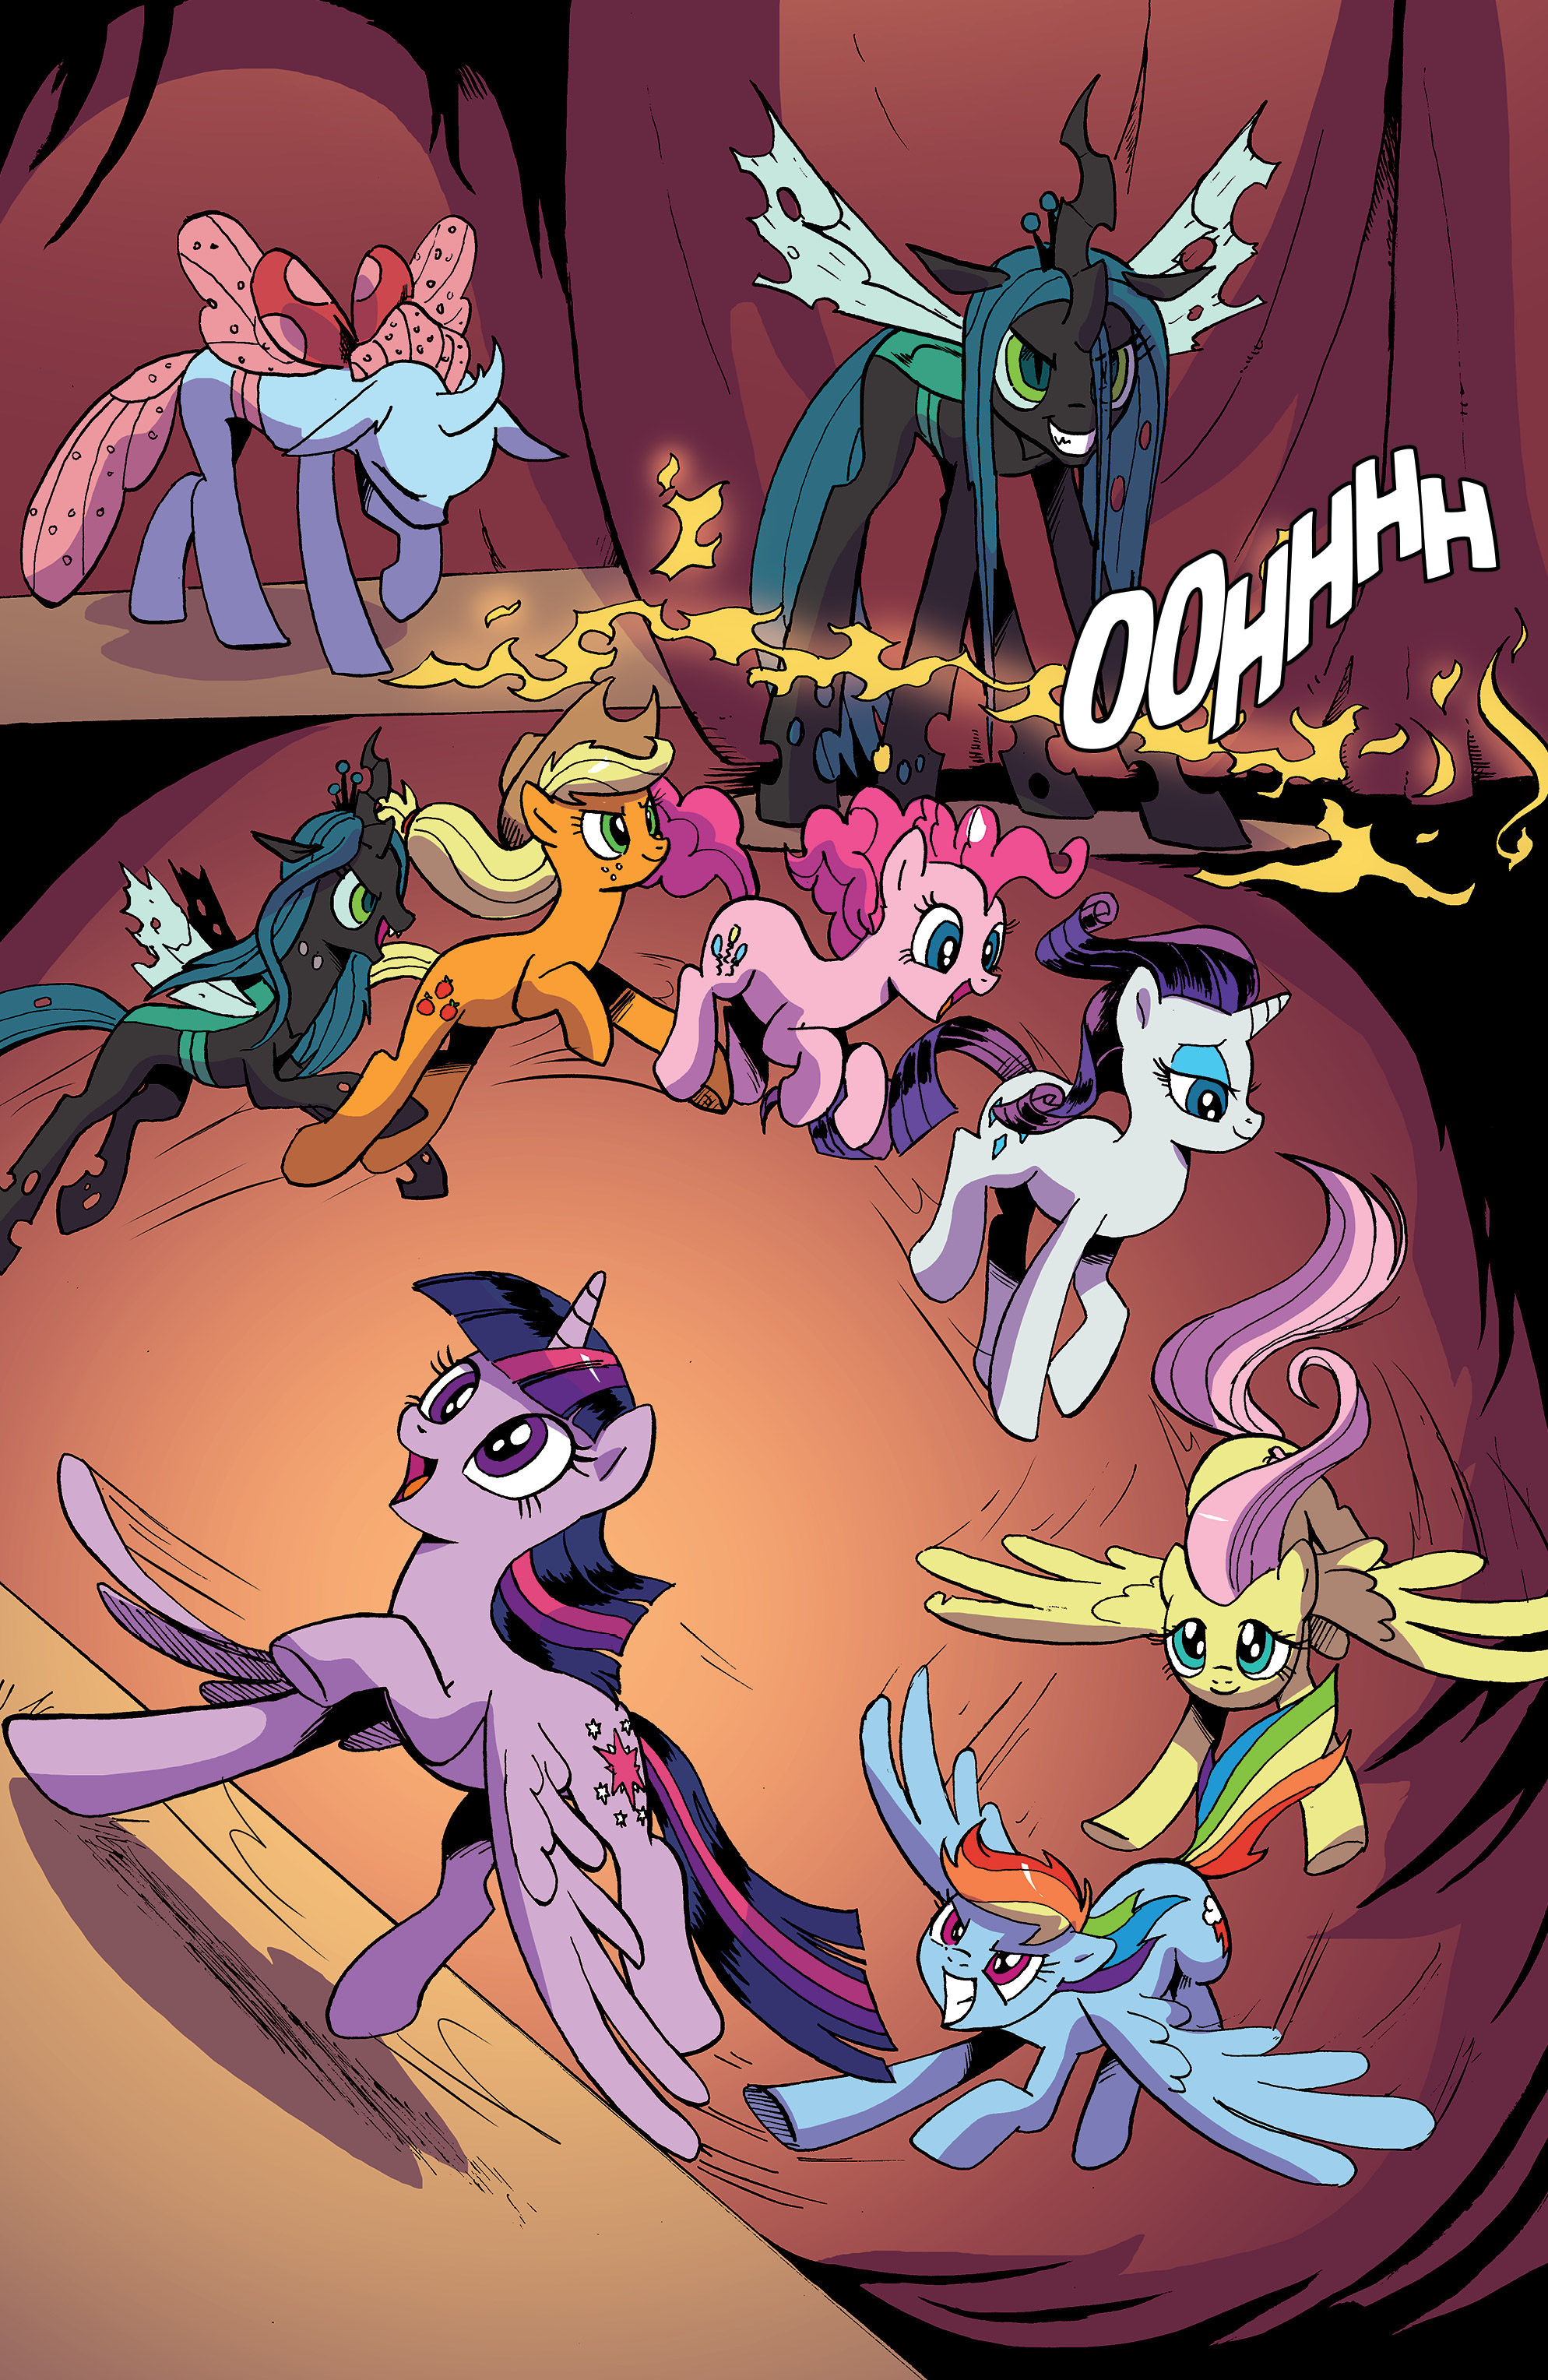 Read online My Little Pony: Friendship is Magic comic -  Issue #84 - 18